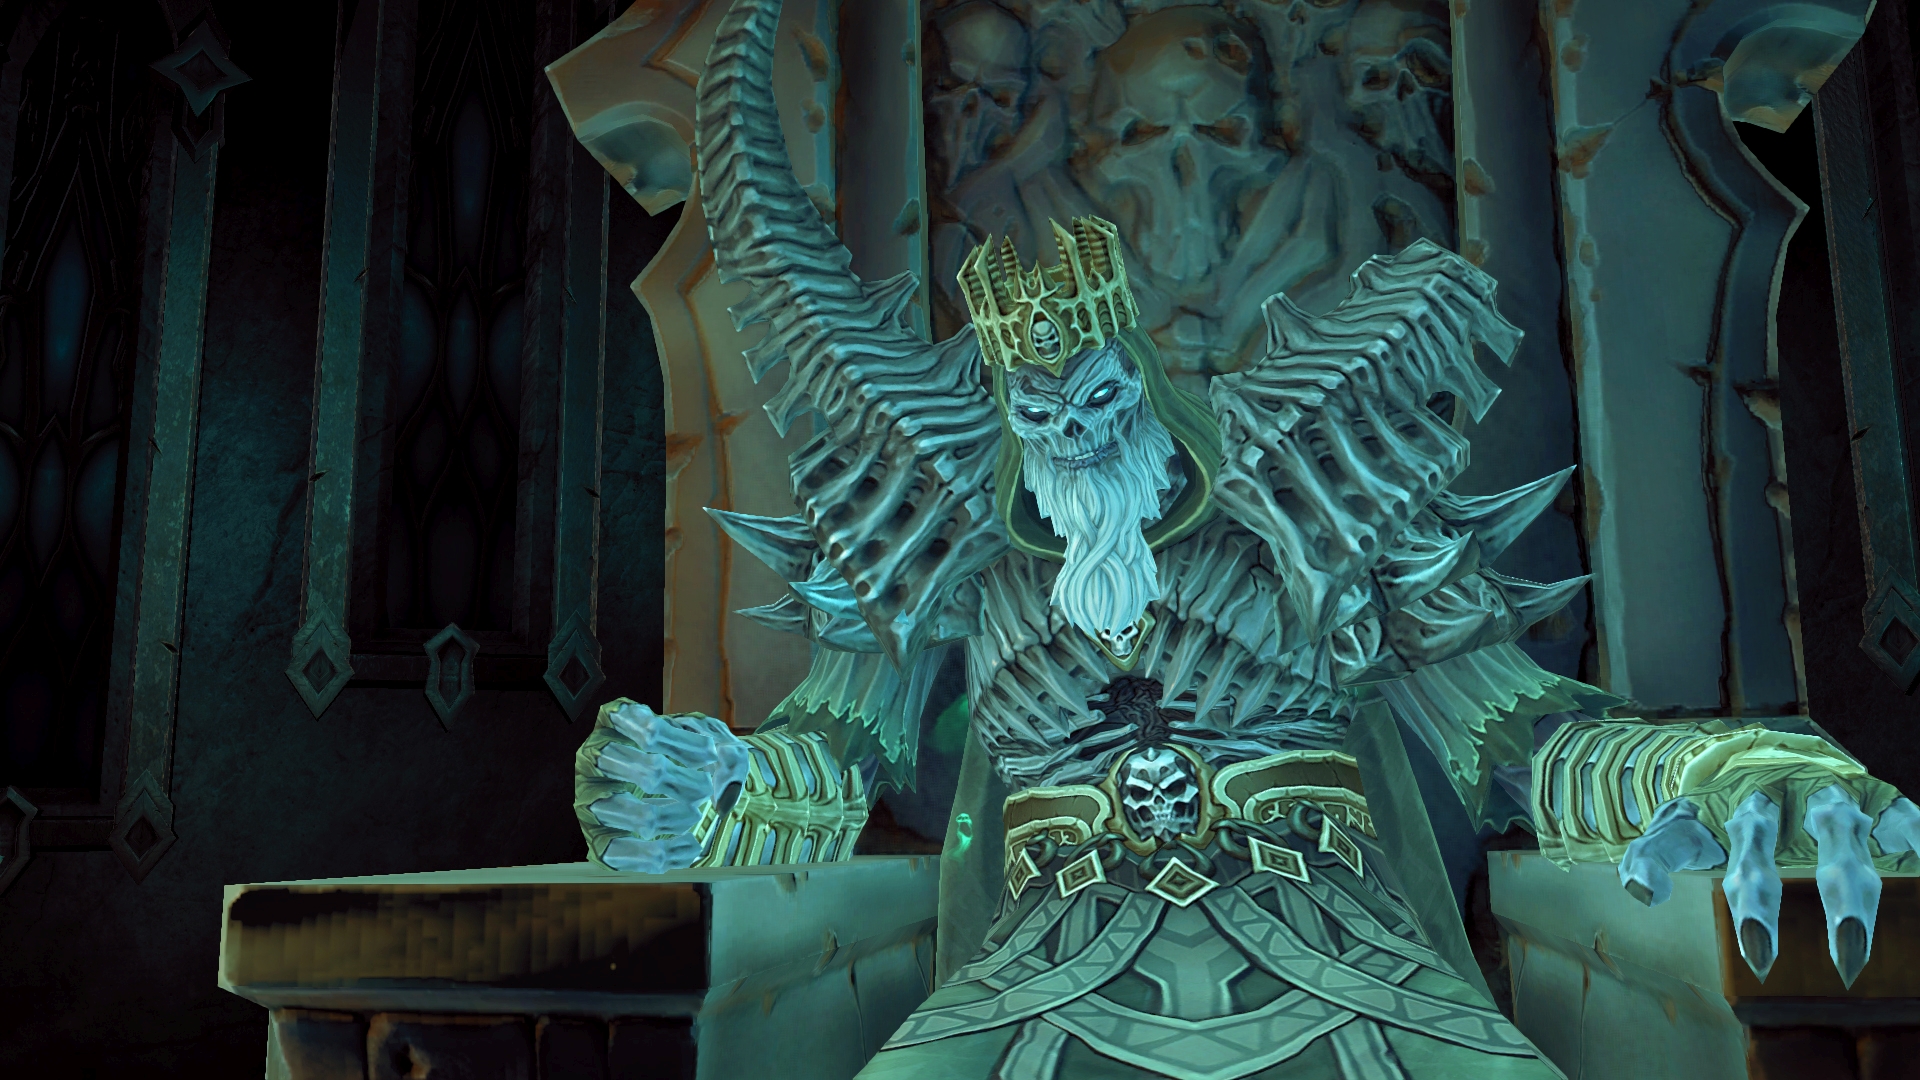 Darksiders II: Deathinitive Edition is Launching on October 27